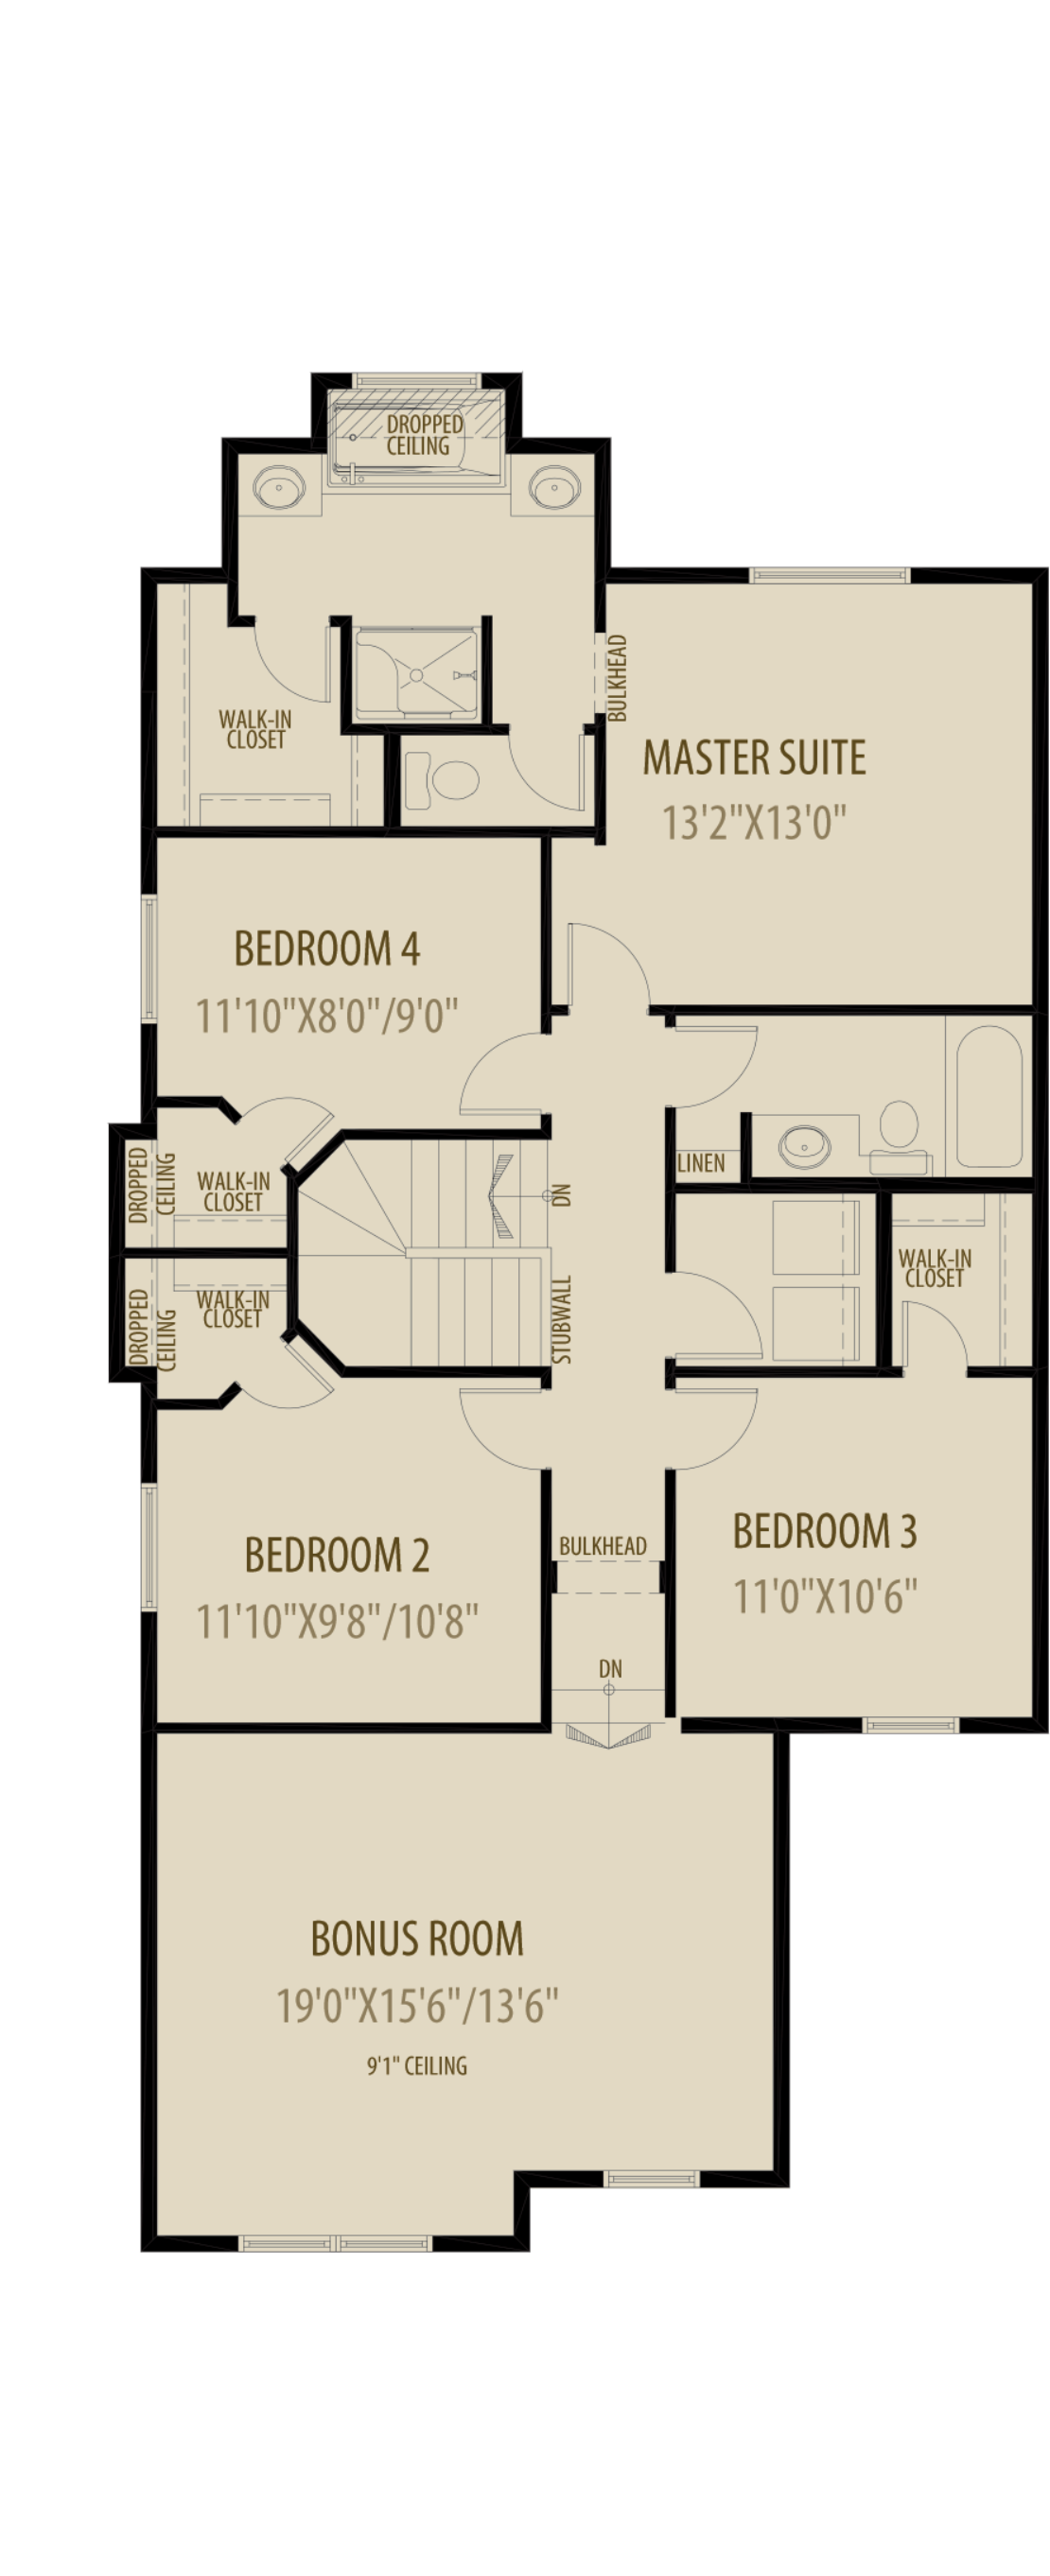 4Th Bedroom W  Revised Ensuite Adds 61Sq Ft